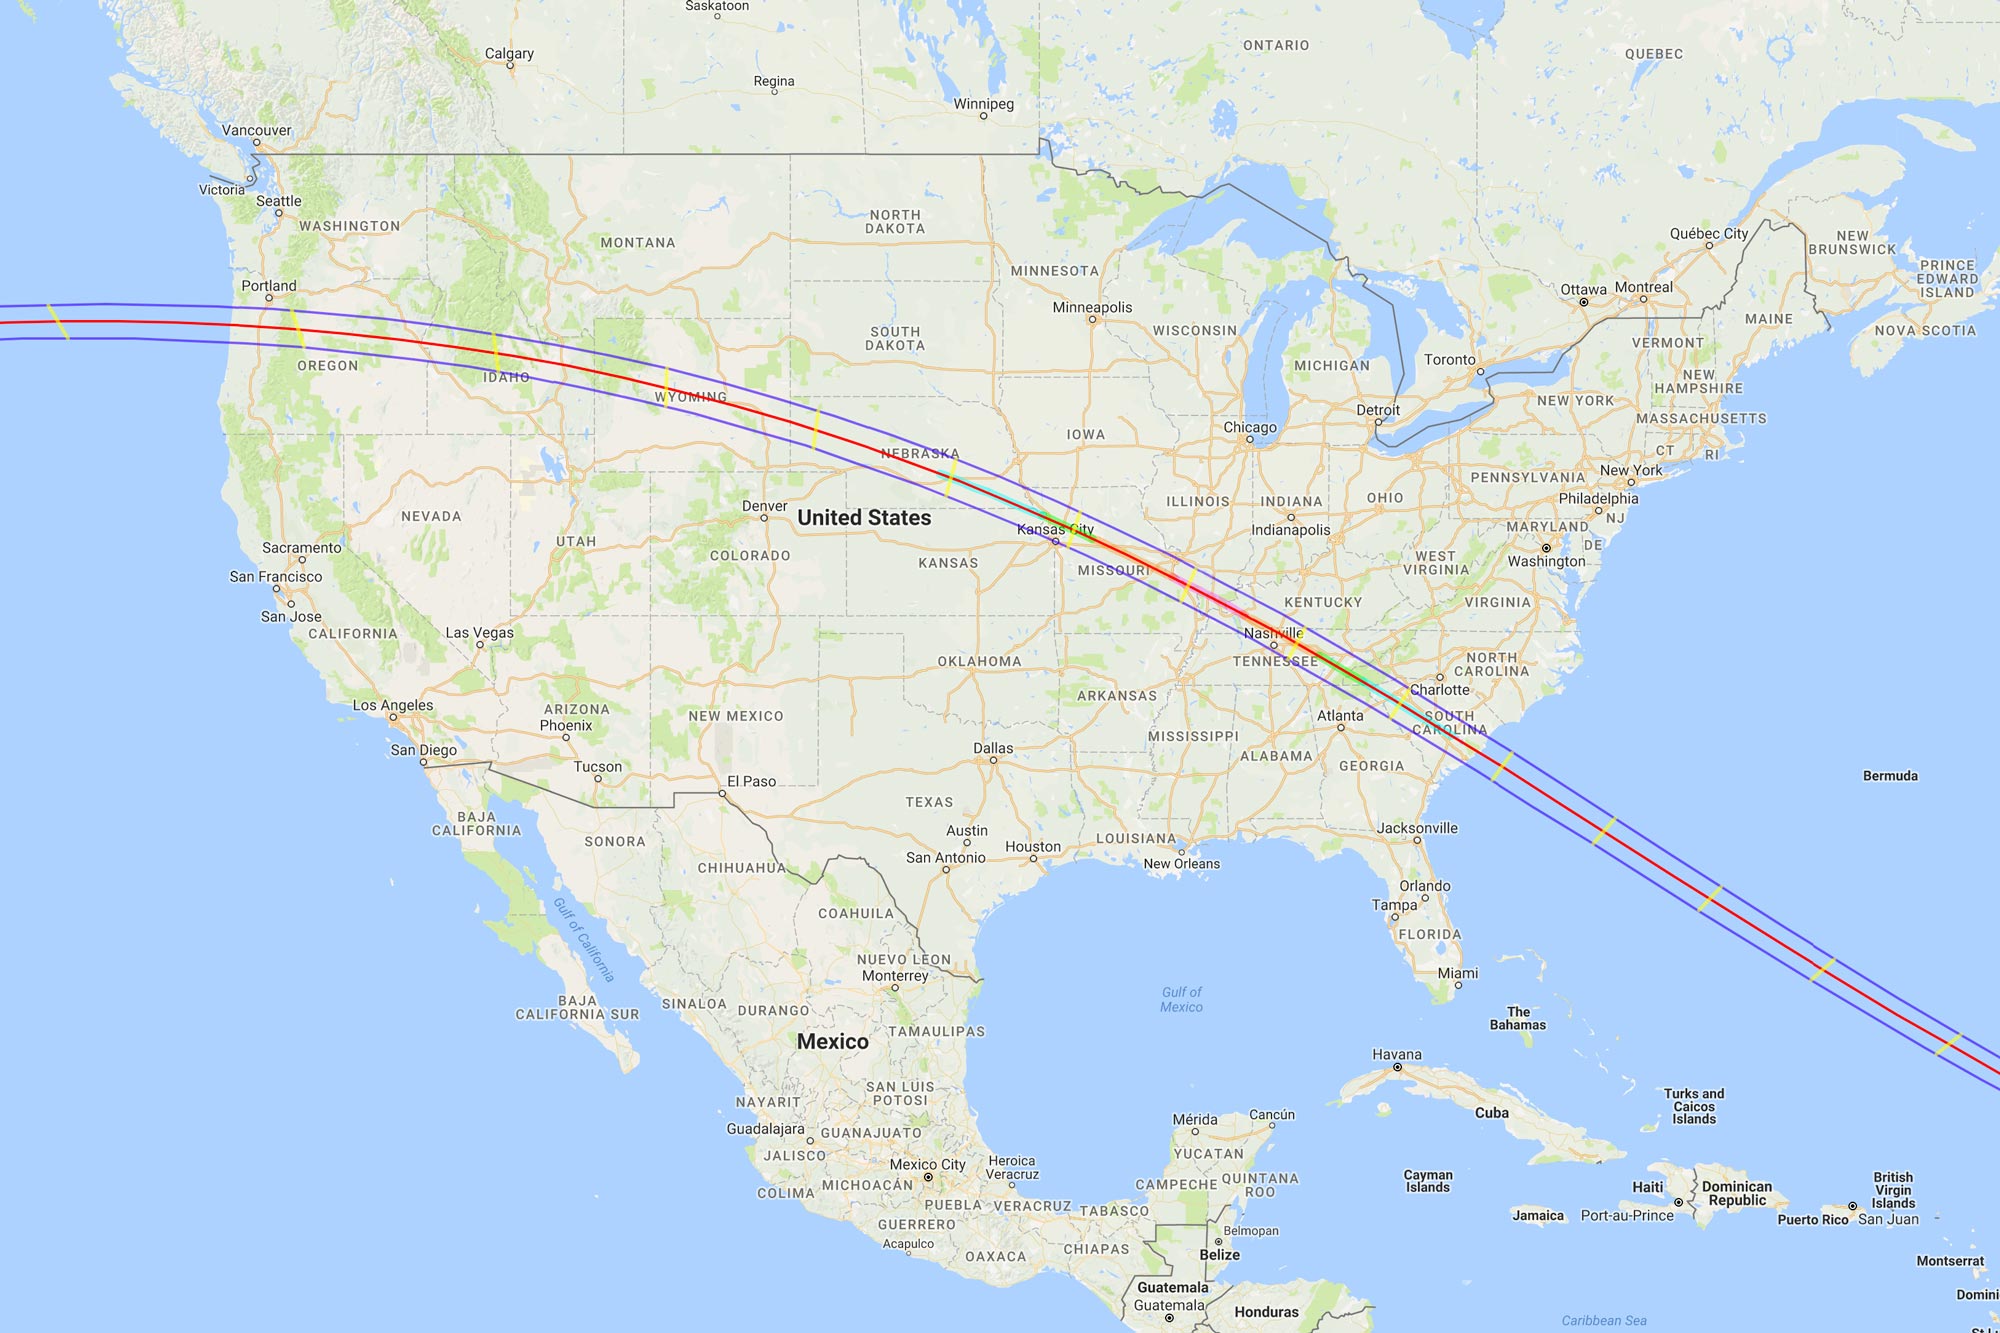 The path of the eclipse will cross 14 states, beginning in Oregon, and ending off the coast of South Carolina